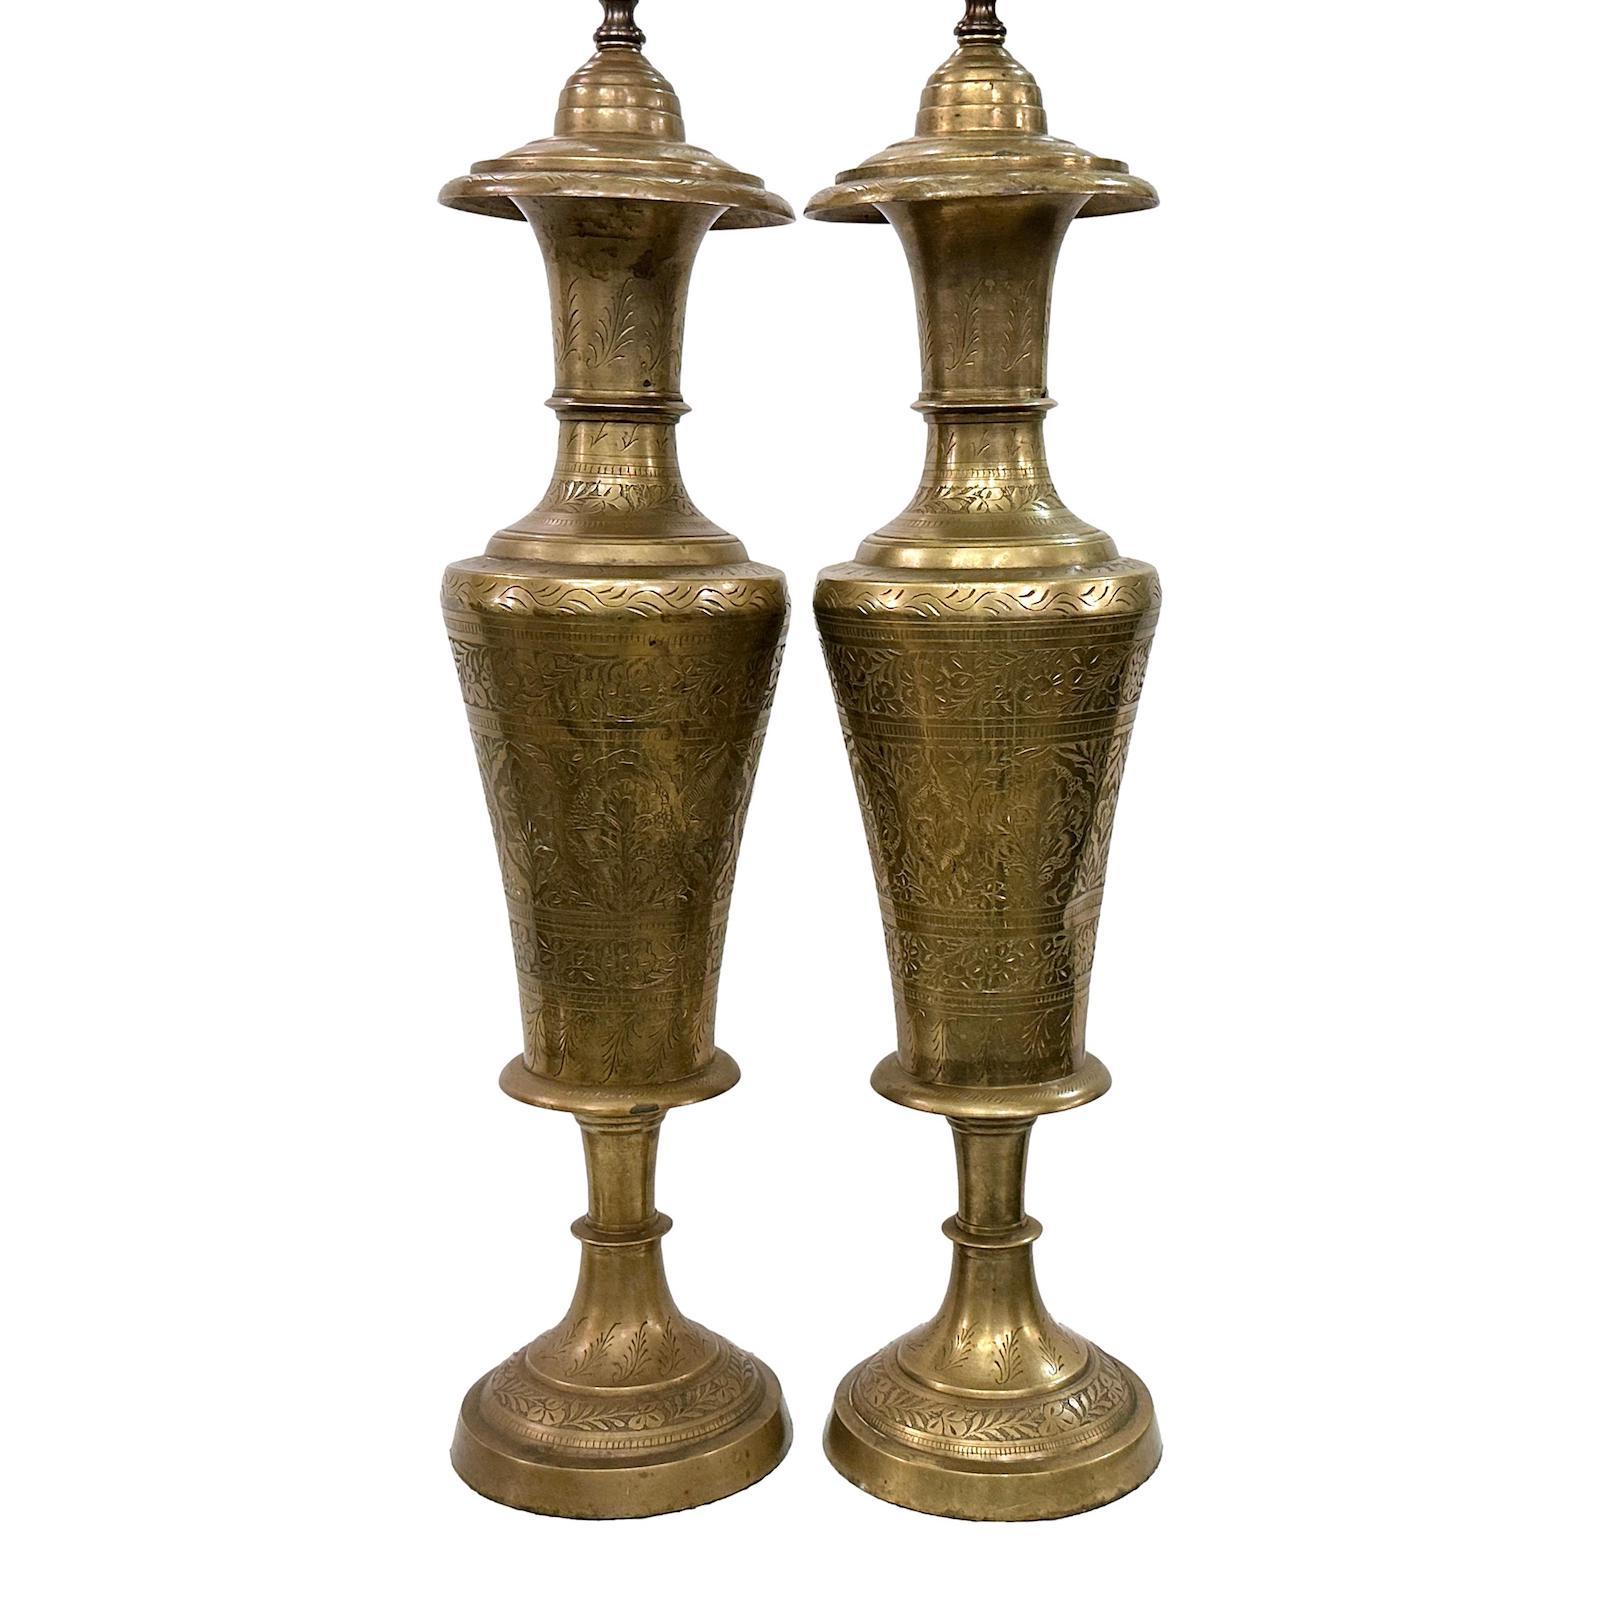 Pair of Turkish circa 1920's etched brass lamps with foliage motif. One has a dent on the side of the body.

Measurements:
Height of body: 25